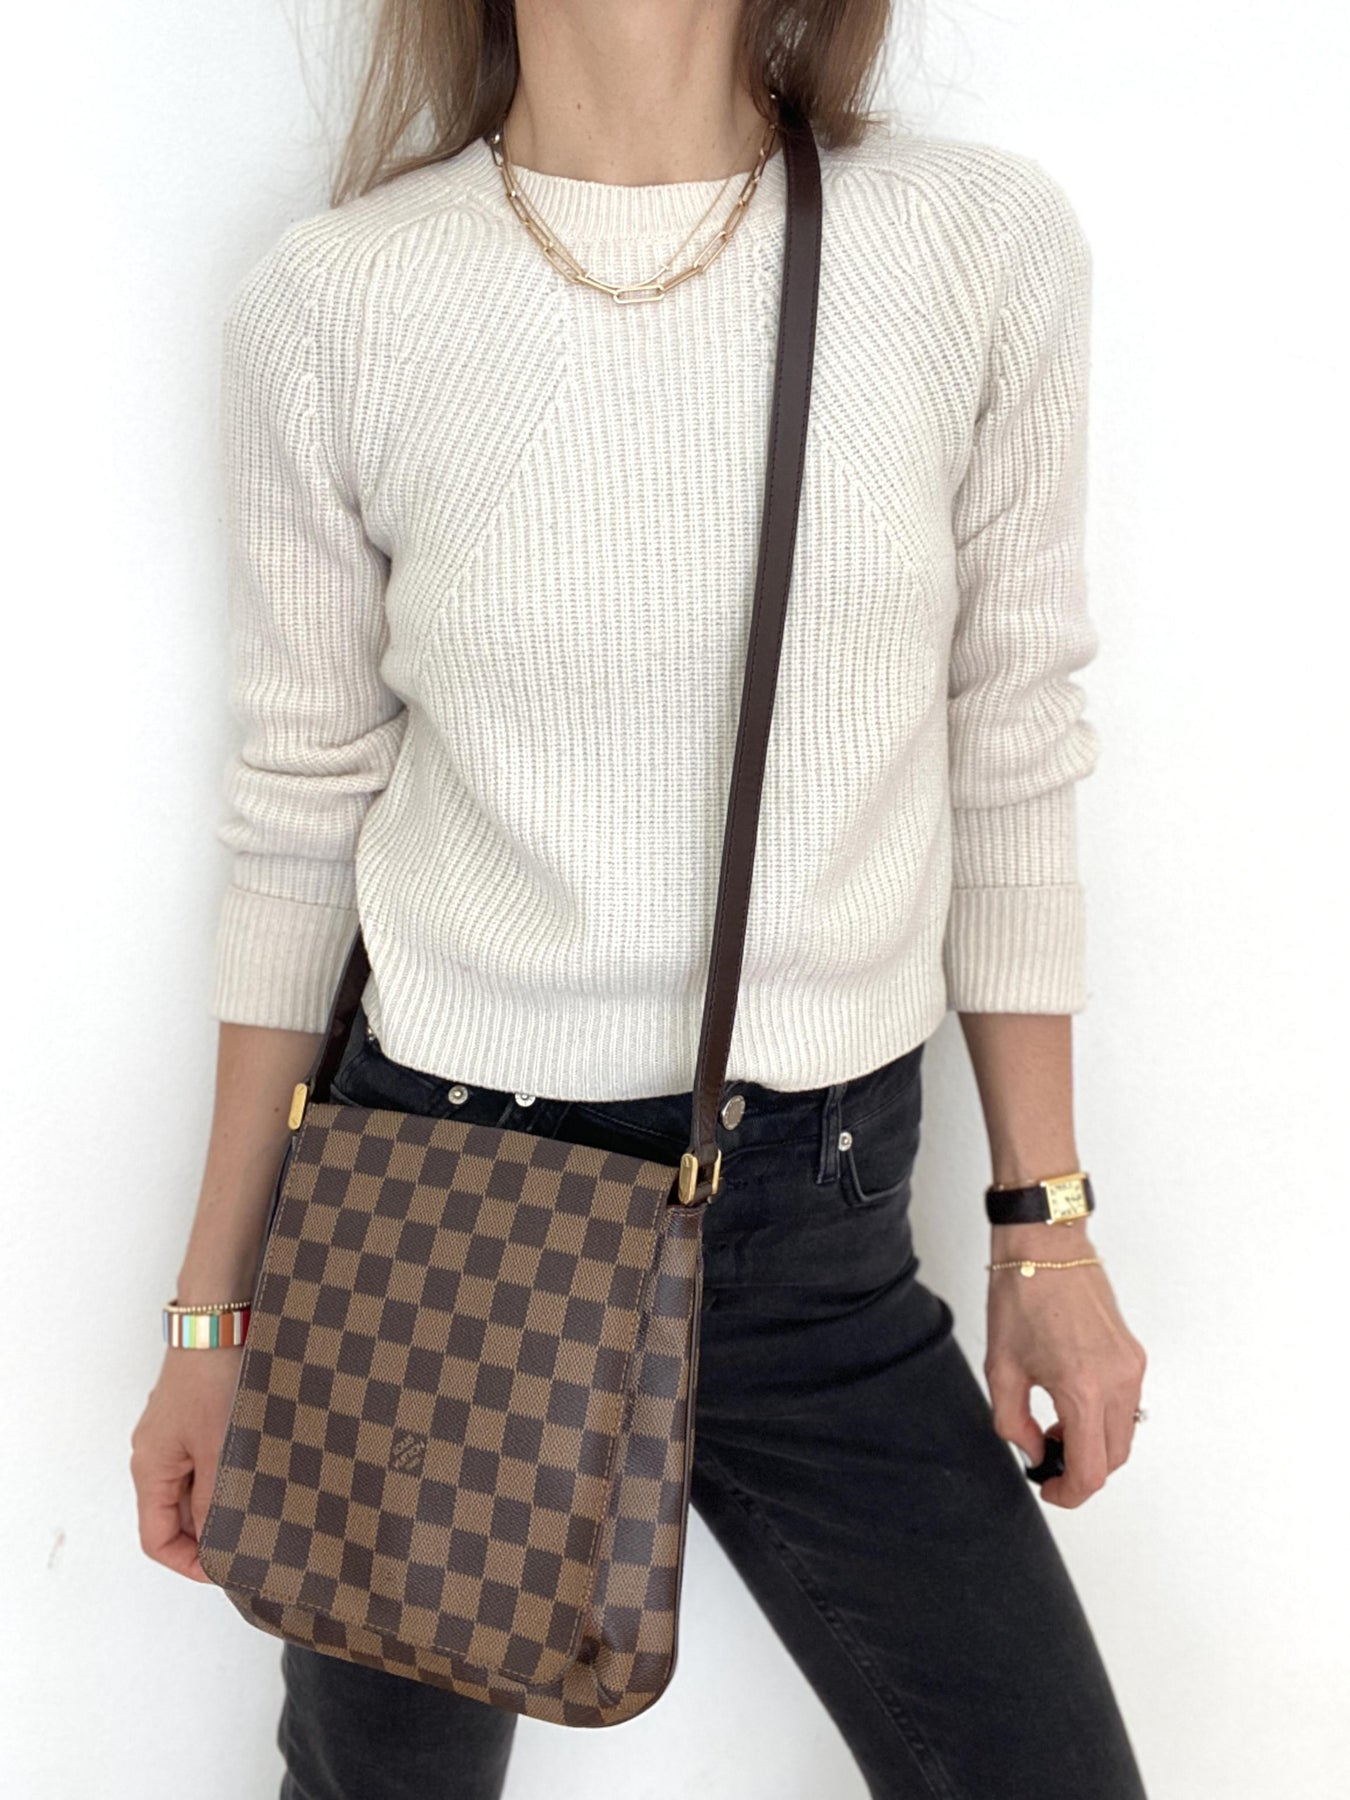 Musette Salsa Damier Crossbody bag in Coated Canvas, Gold Hardware